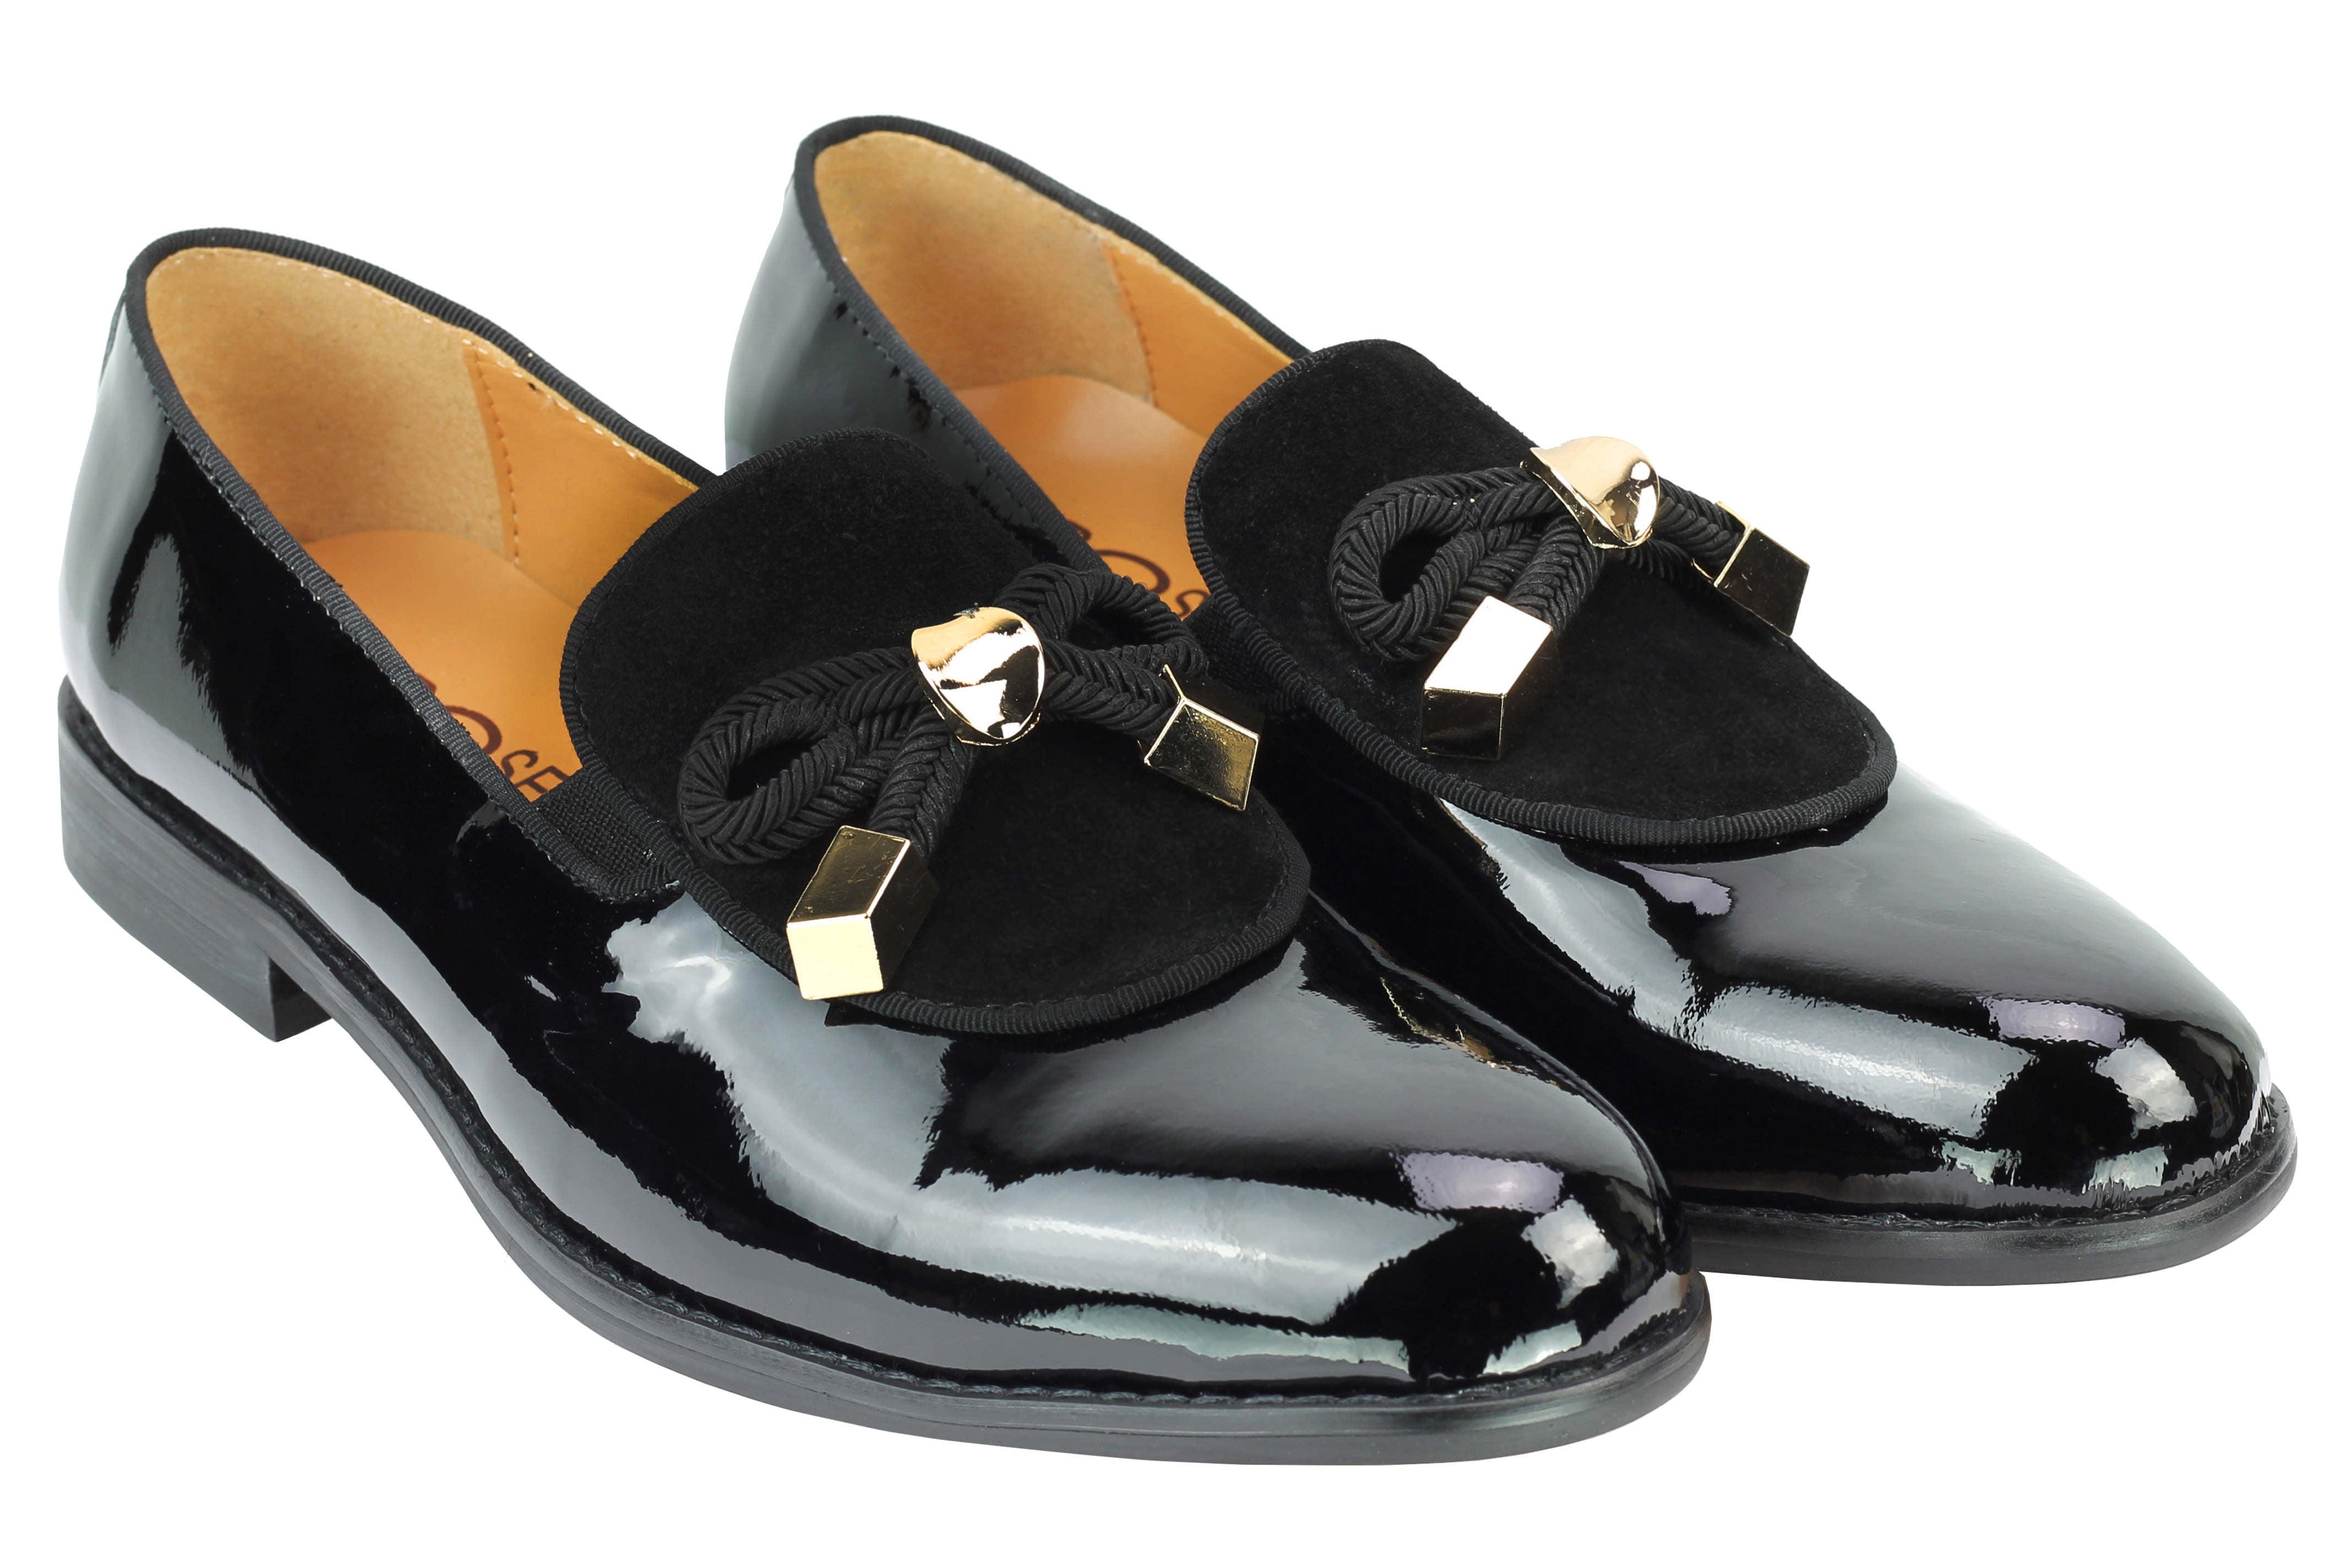 Mens Black Patent Real Leather Glossy Rope Bow Tie Metal Trim Loafers Wedding Party Shoes